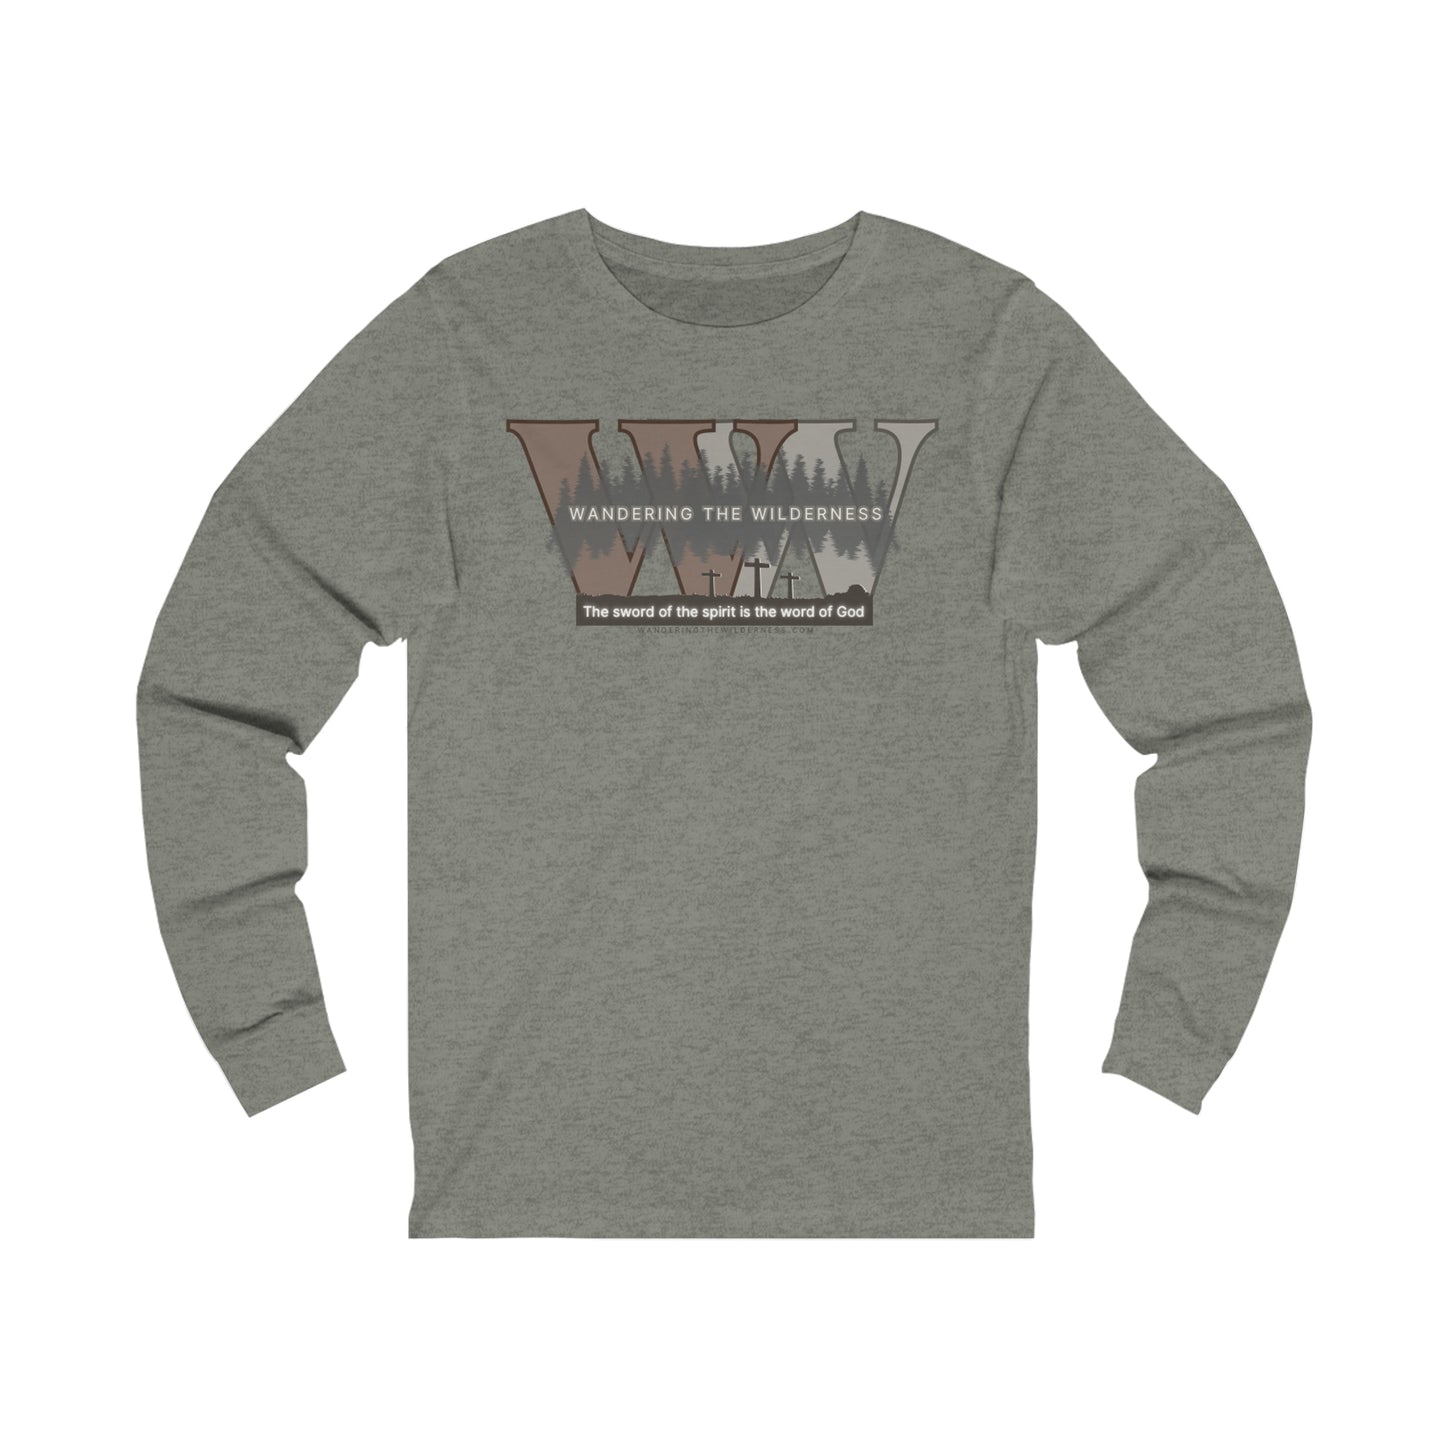 Wandering the Wilderness big logo on from long sleeve t-shirt.